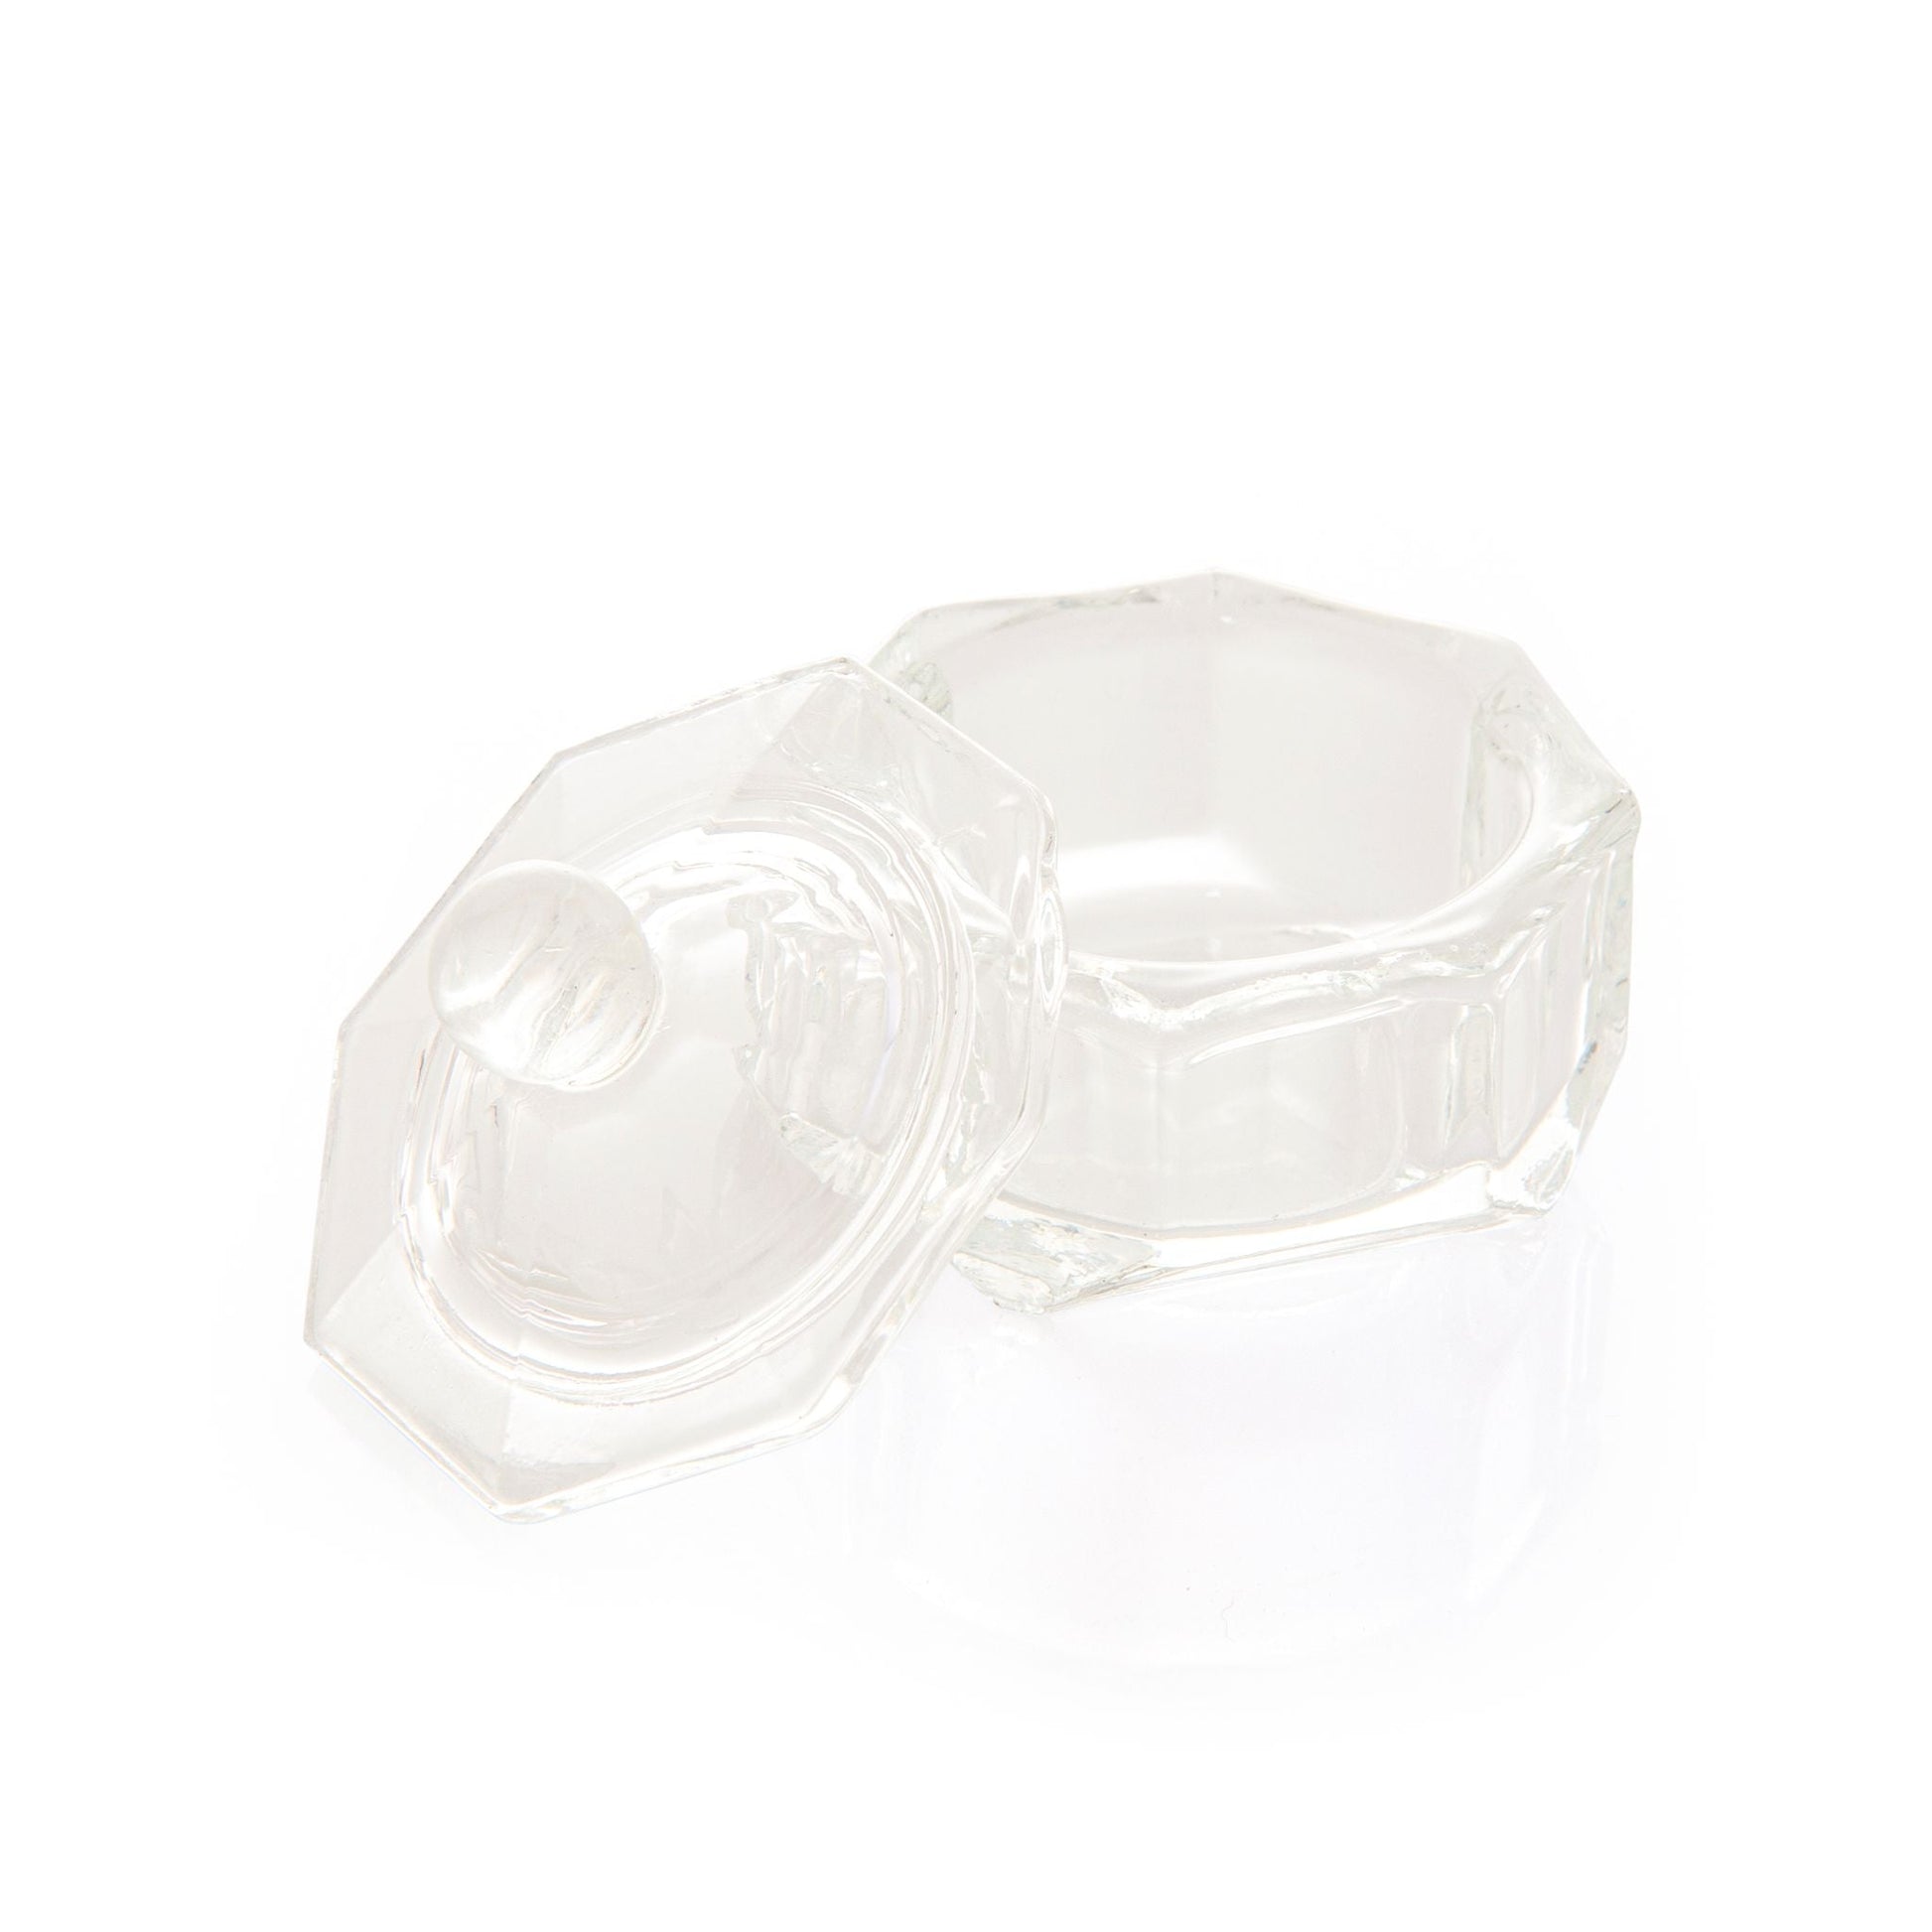 Small Glass Dappen Dish With Lid - Lashmer Nails&Eyelashes Supplier